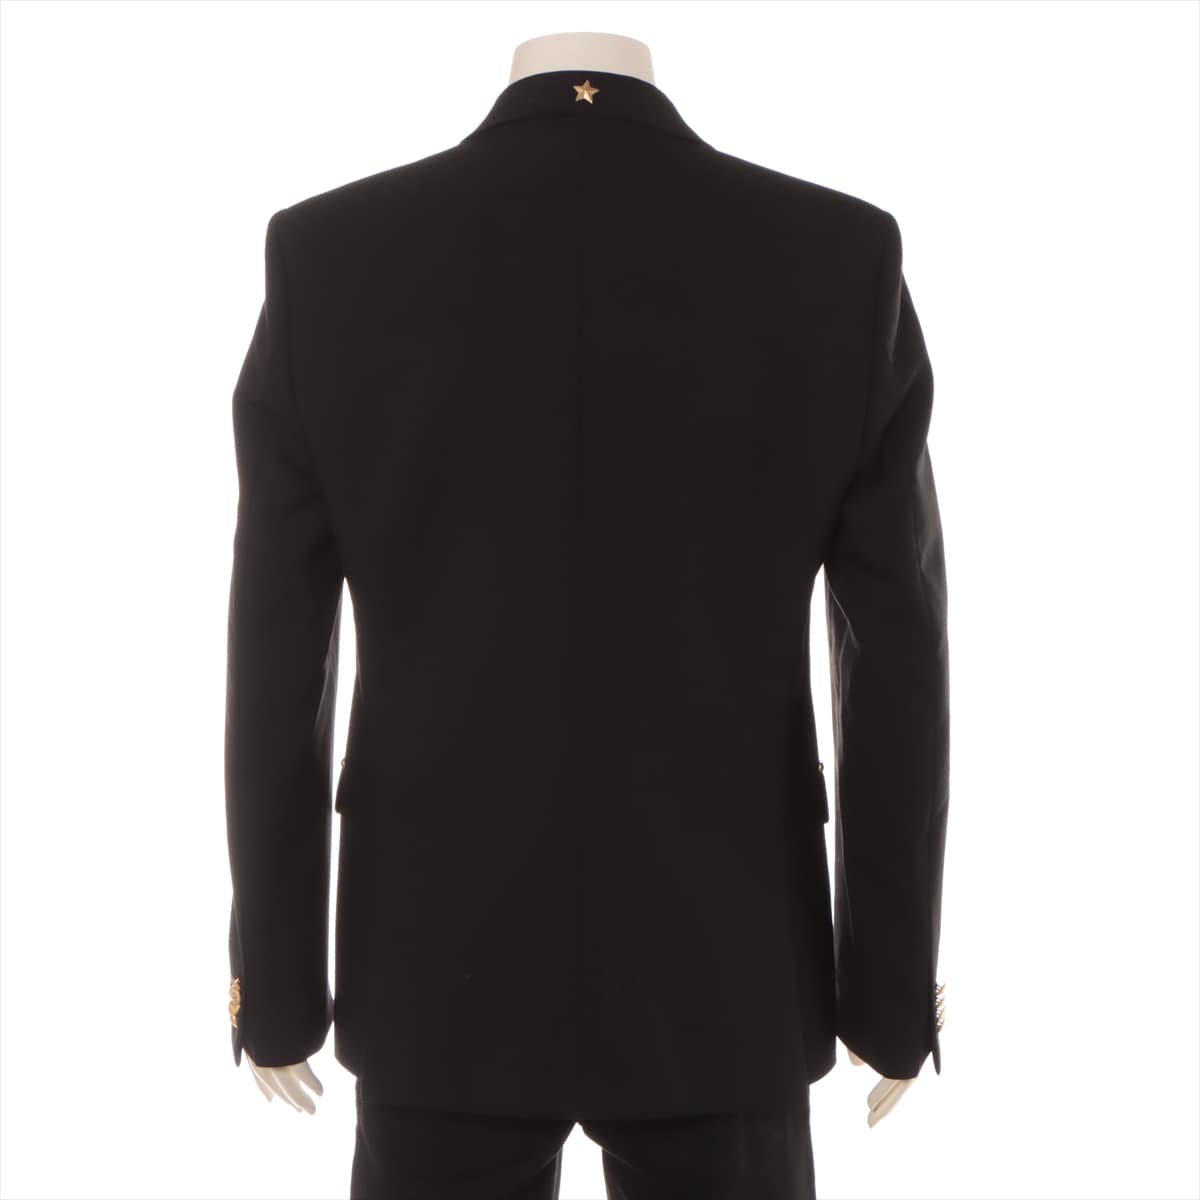 Givenchy Wool & mohair Tailored jacket 50 Men's Black  Star button